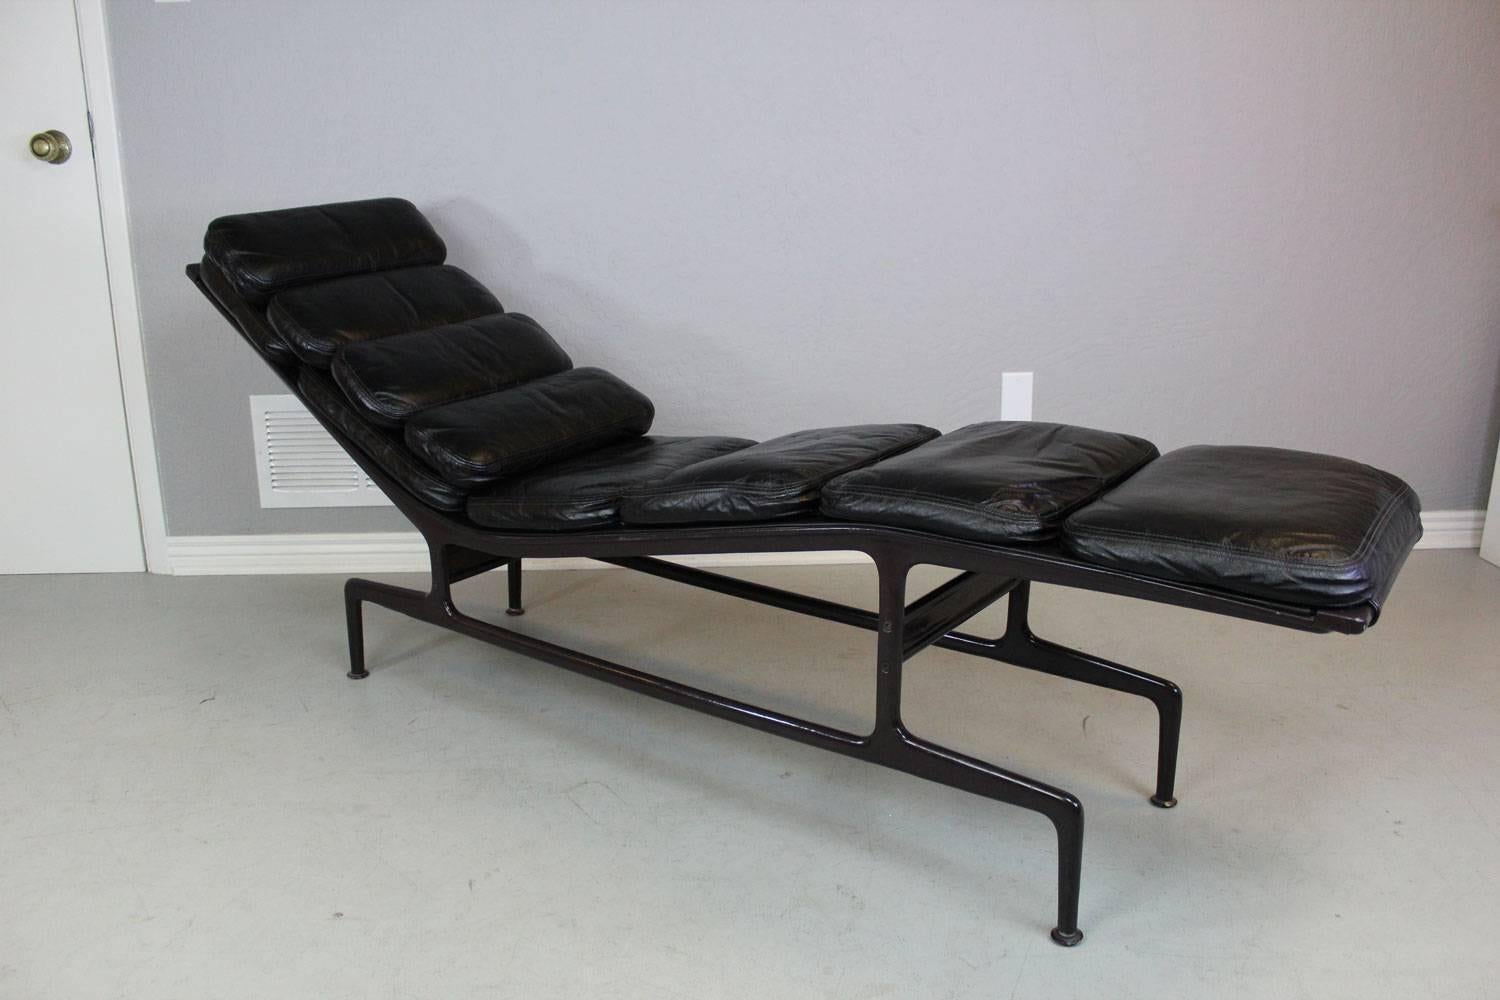 Billy Wilder chaise in black leather by Charles and Ray Eames. This leather and metal chaise is all original and comes with four extra black leather pillows on a powder coated metal base.